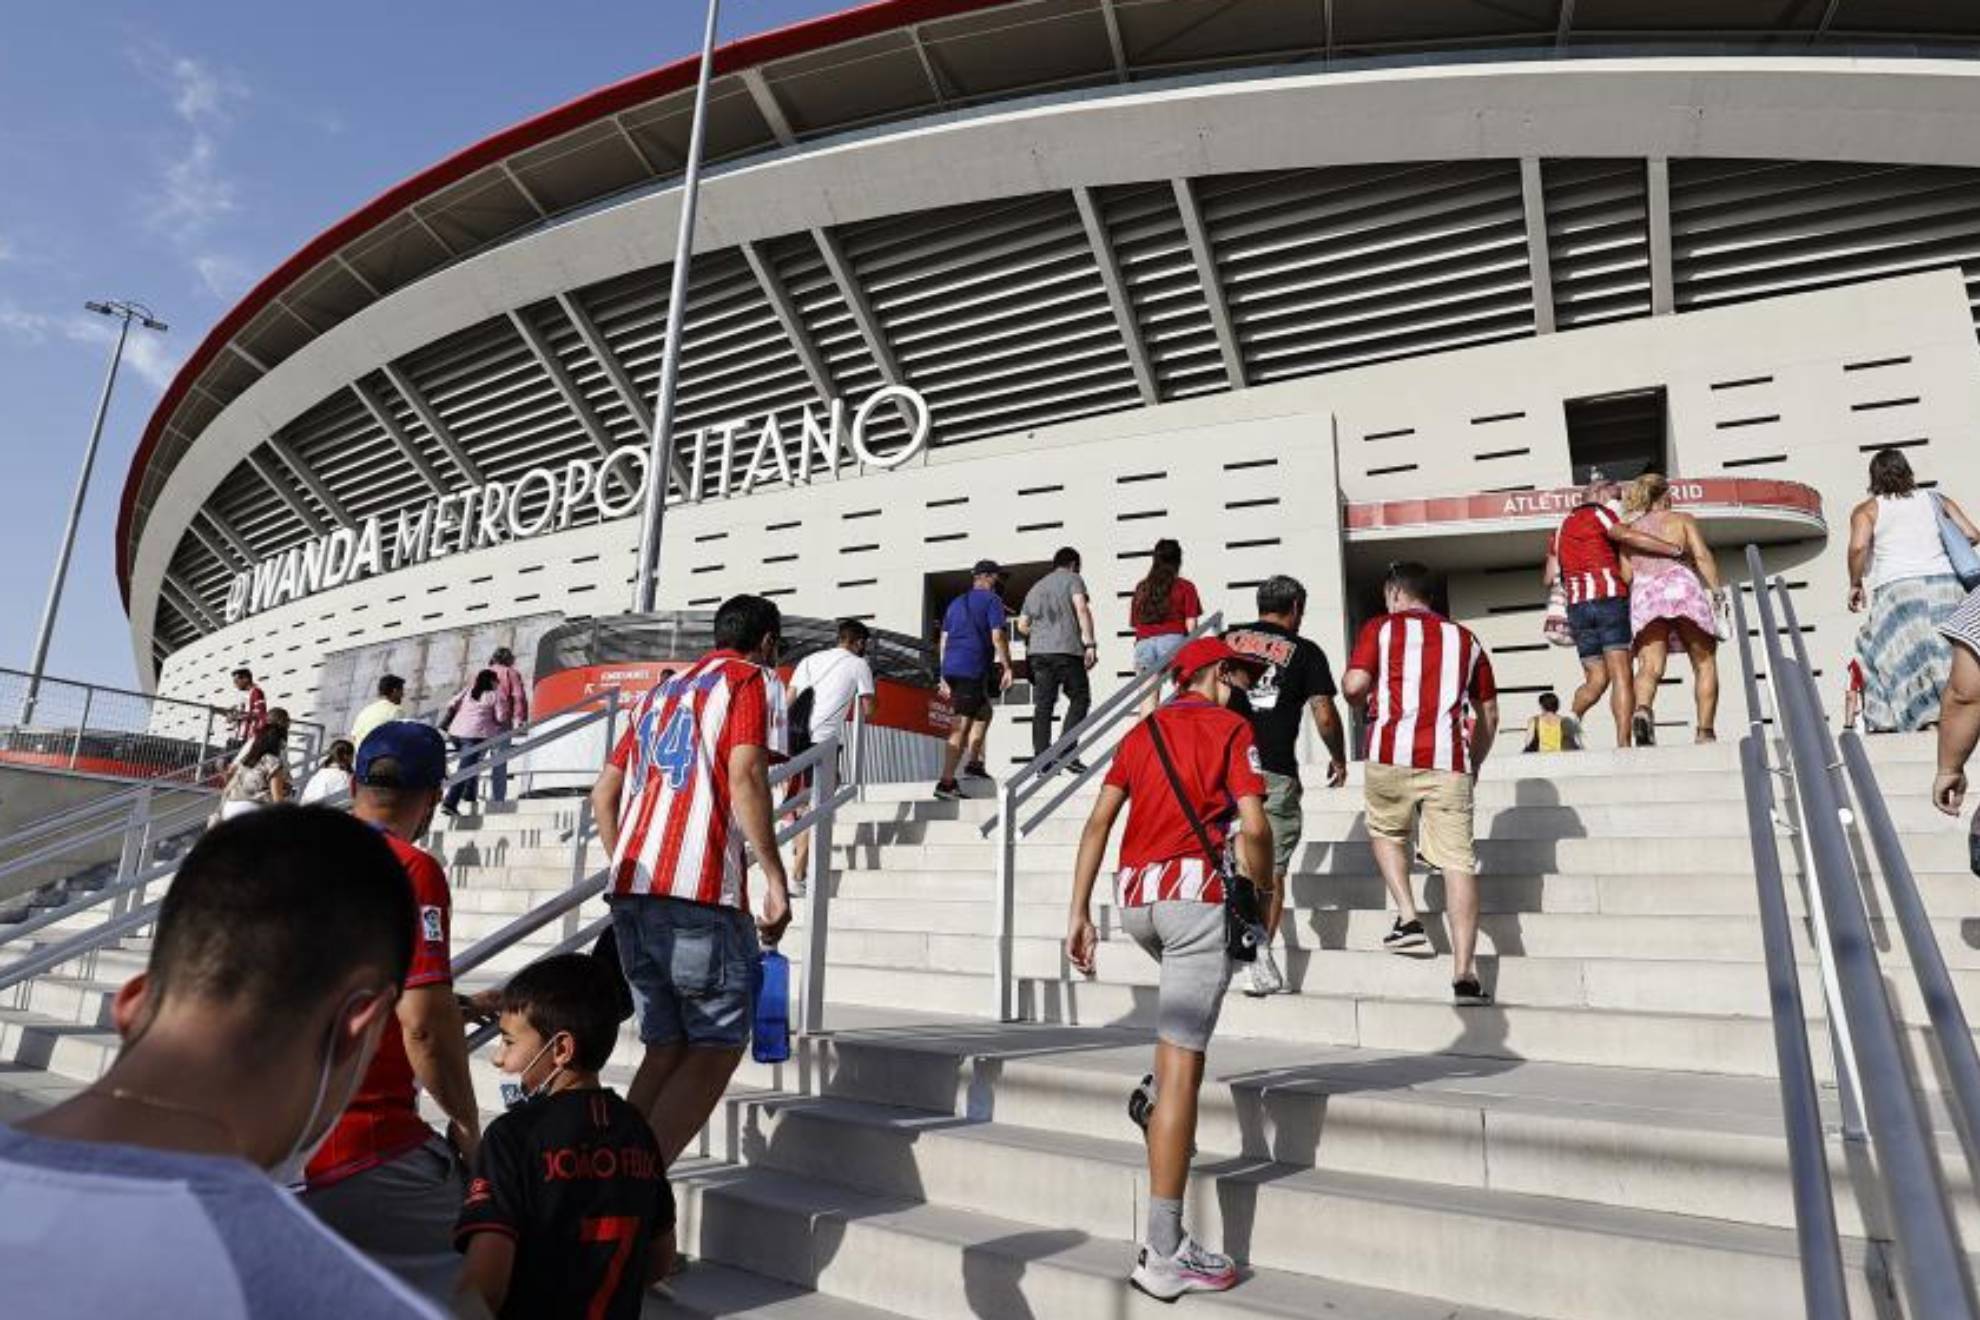 Real Madrid sends invitation to girl who was subject to racist insults near the Metropolitano